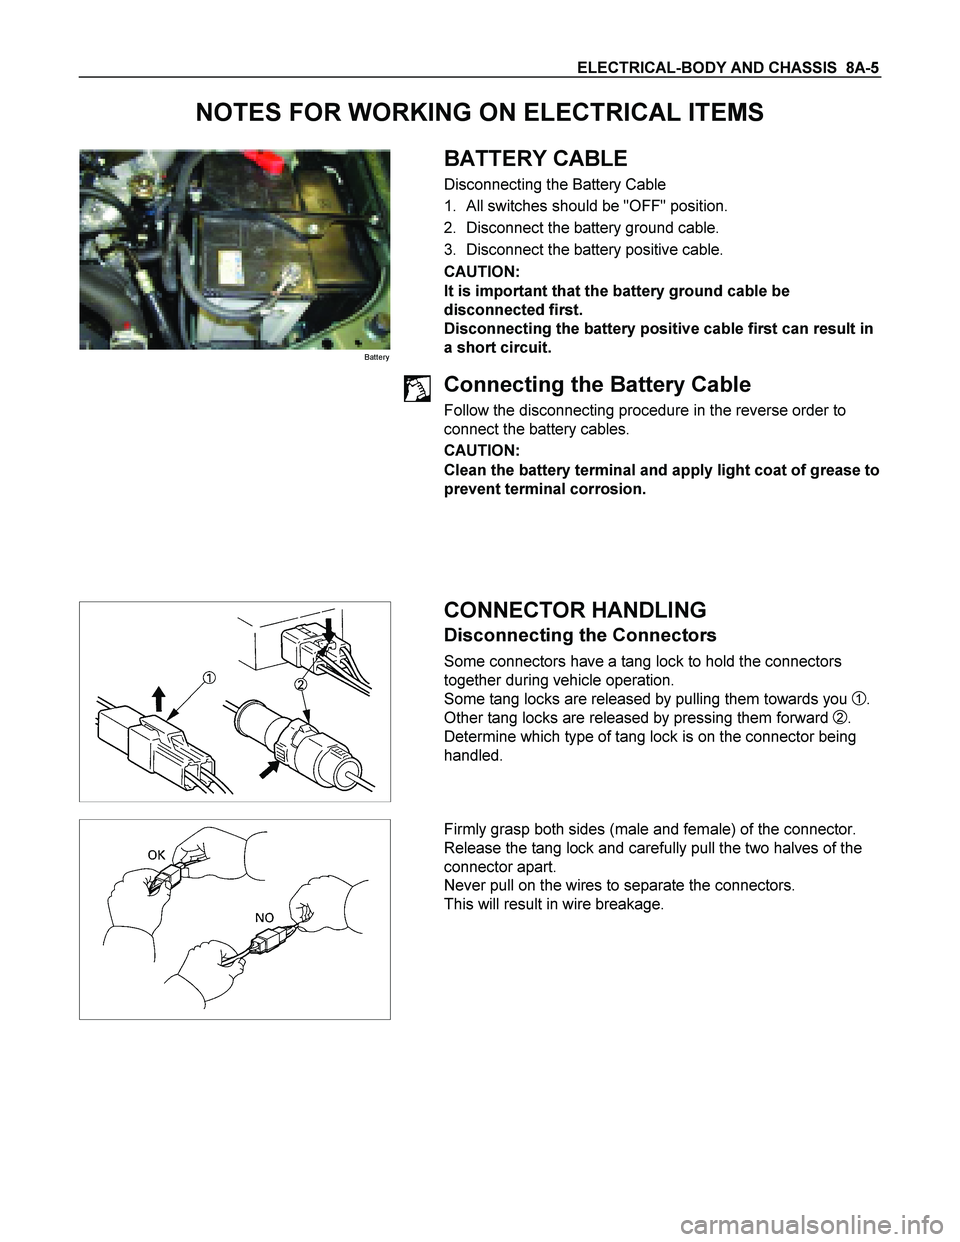 ISUZU TF SERIES 2004  Workshop Manual ELECTRICAL-BODY AND CHASSIS  8A-5 
NOTES FOR WORKING ON ELECTRICAL ITEMS 
Battery 
 
 BATTERY CABLE 
Disconnecting the Battery Cable 
1.  All switches should be "OFF" position. 
2.  Disconnect the bat